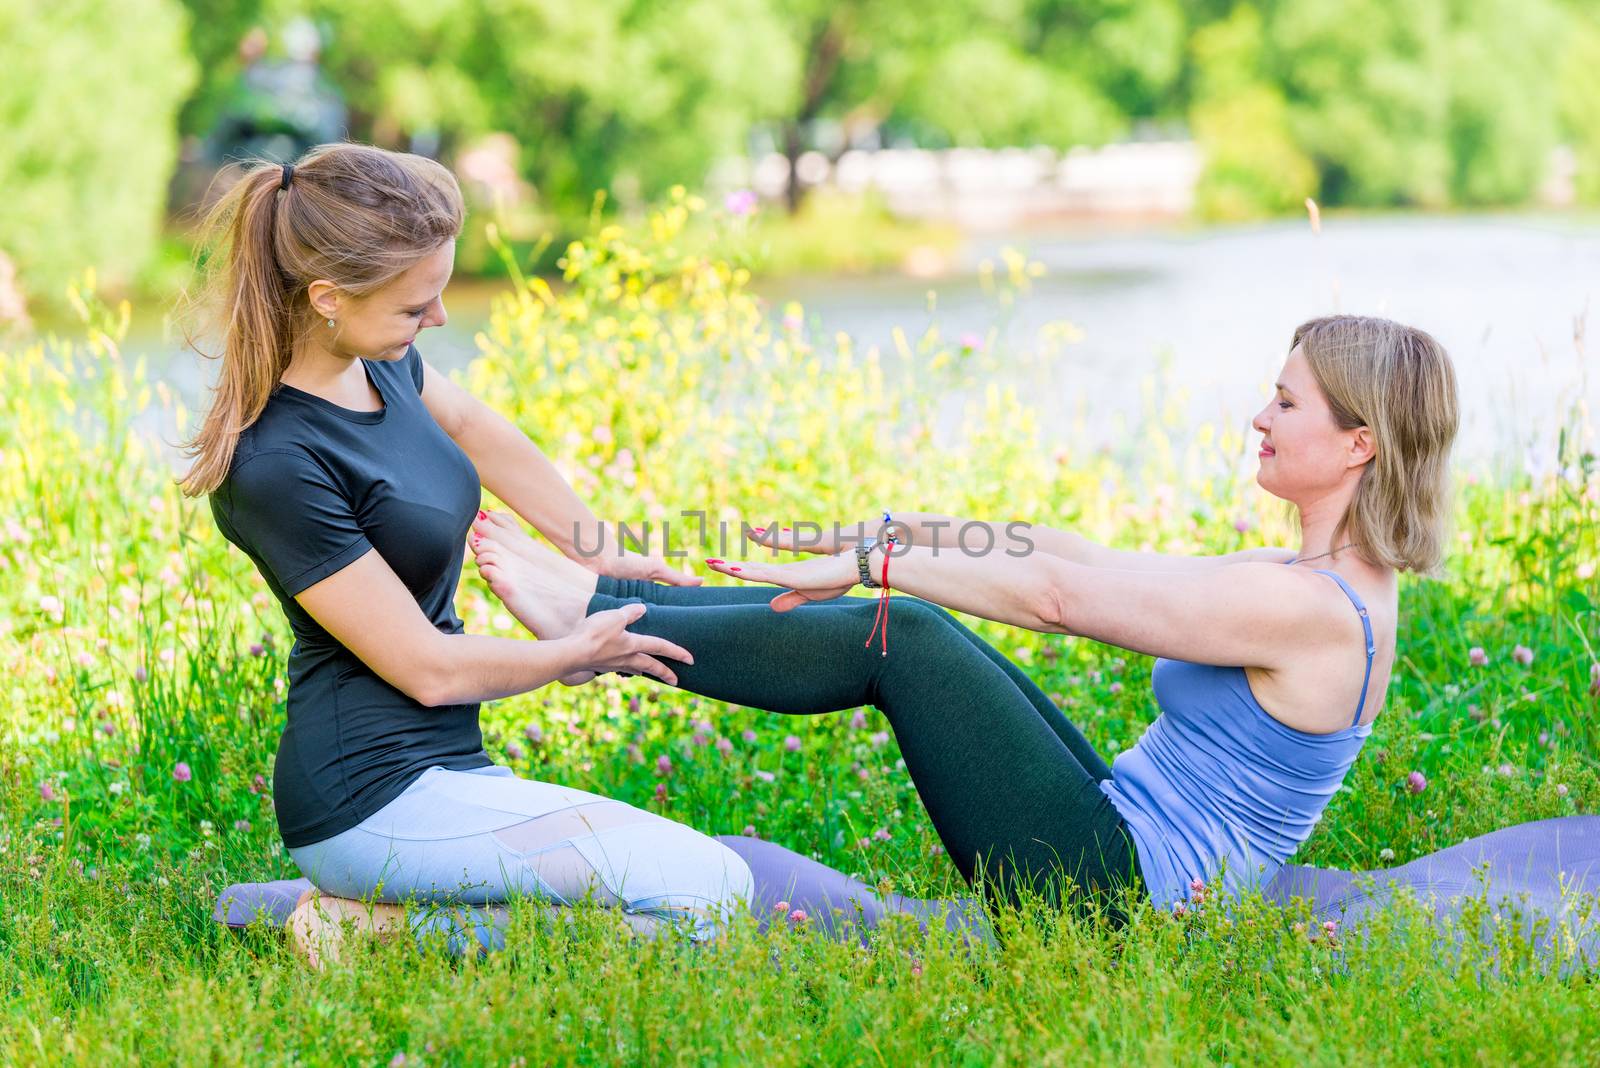 yoga exercise with an individual experienced trainer in the park